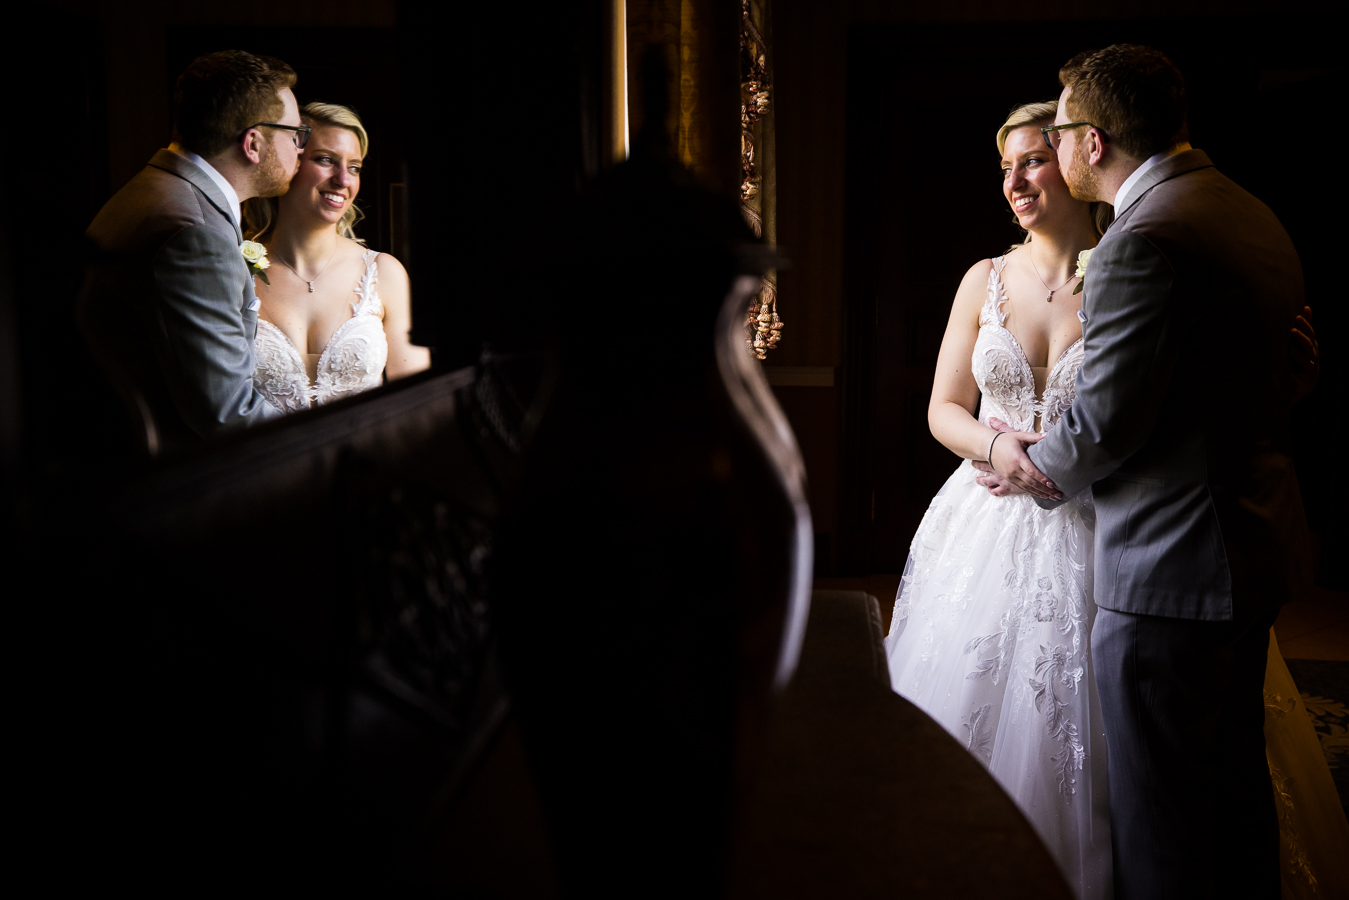 creative NJ Wedding Photographer, lisa rhinehart, captures this unique, creative image of the couple kissing one another on the cheek caught through the reflection of the mirror for their palace at somerset park wedding